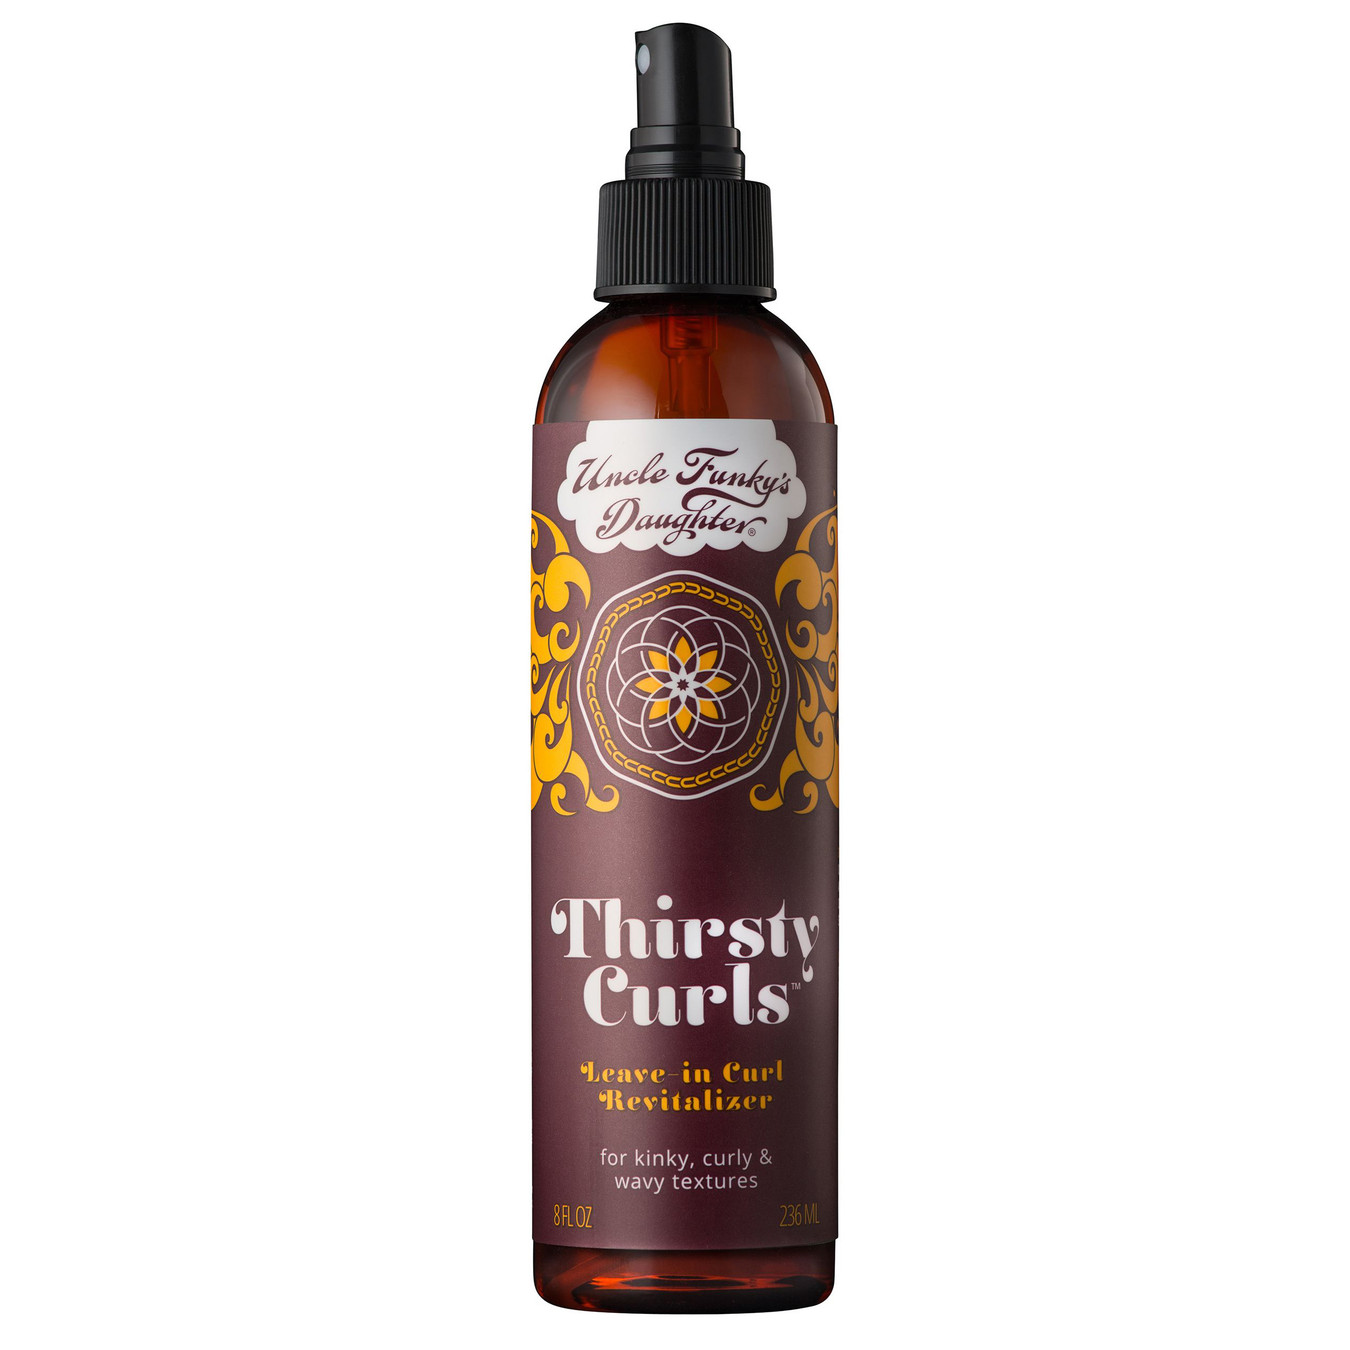 Uncle Funky's Daughter Thirsty Curls Leave-In Curl Revitalizer (8 oz)